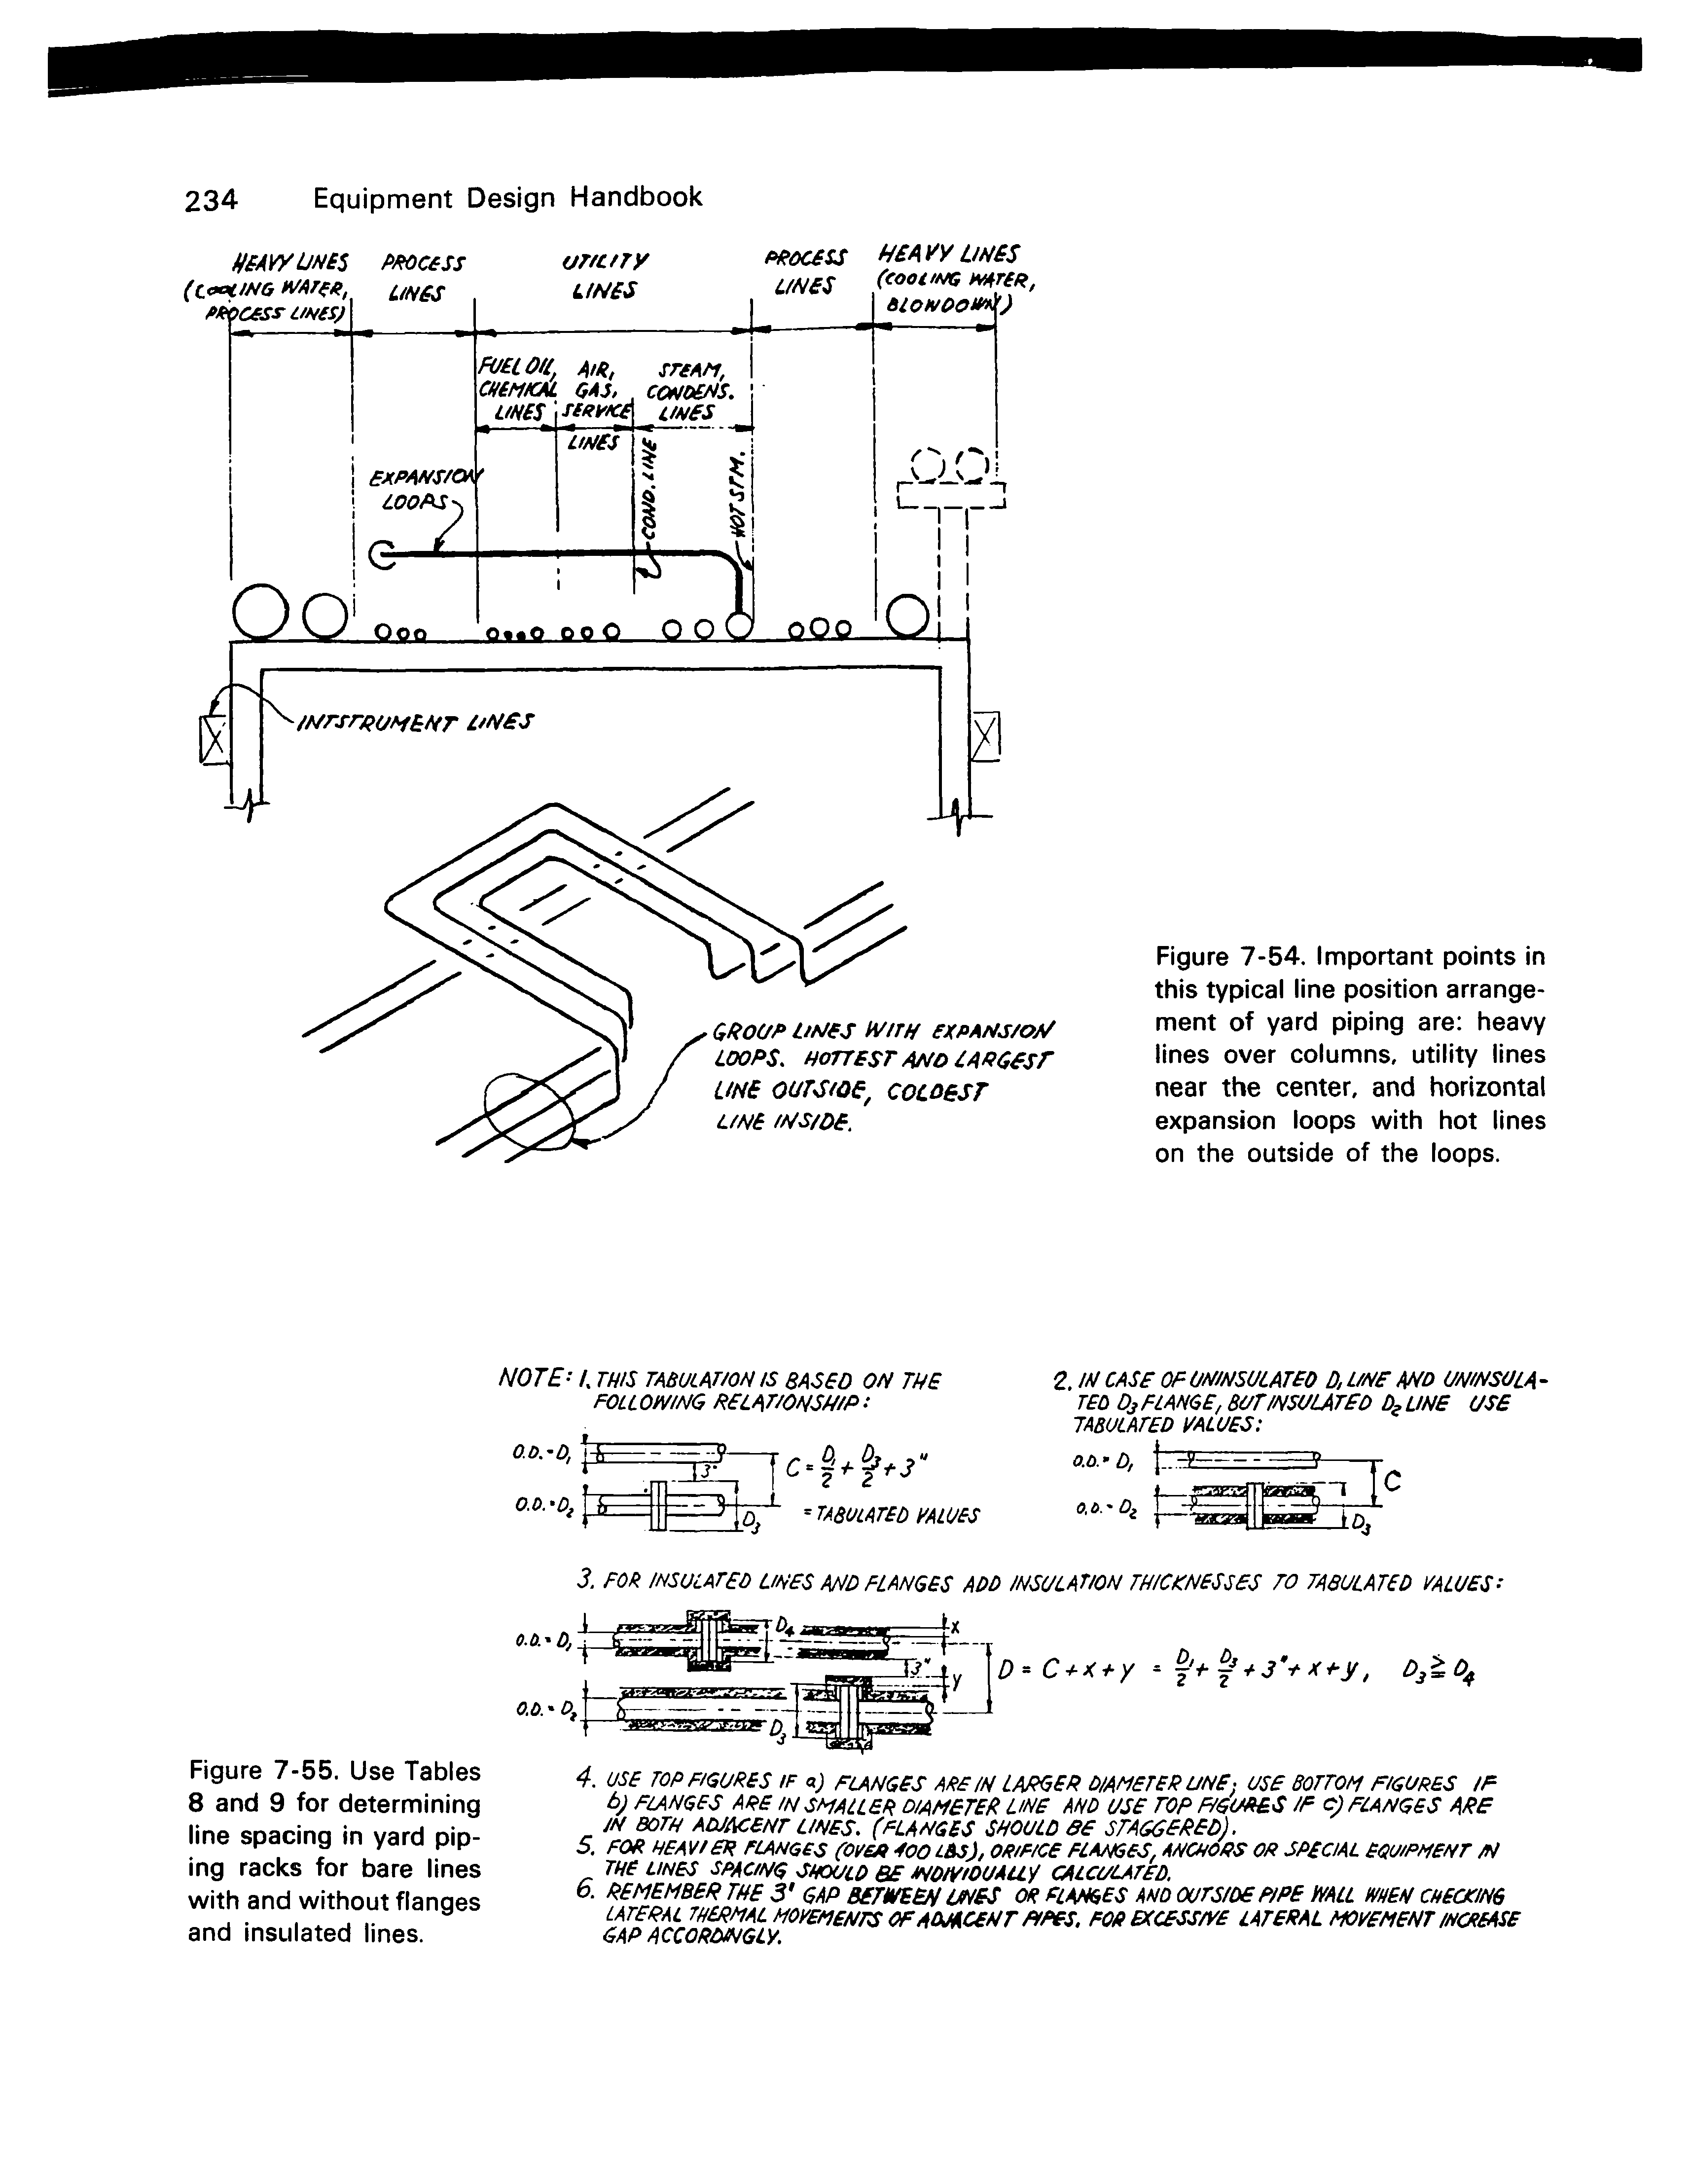 Figure 7-54. Important points in this typical line position arrangement of yard piping are heavy lines over columns, utility lines near the center, and horizontal expansion loops with hot lines on the outside of the loops.